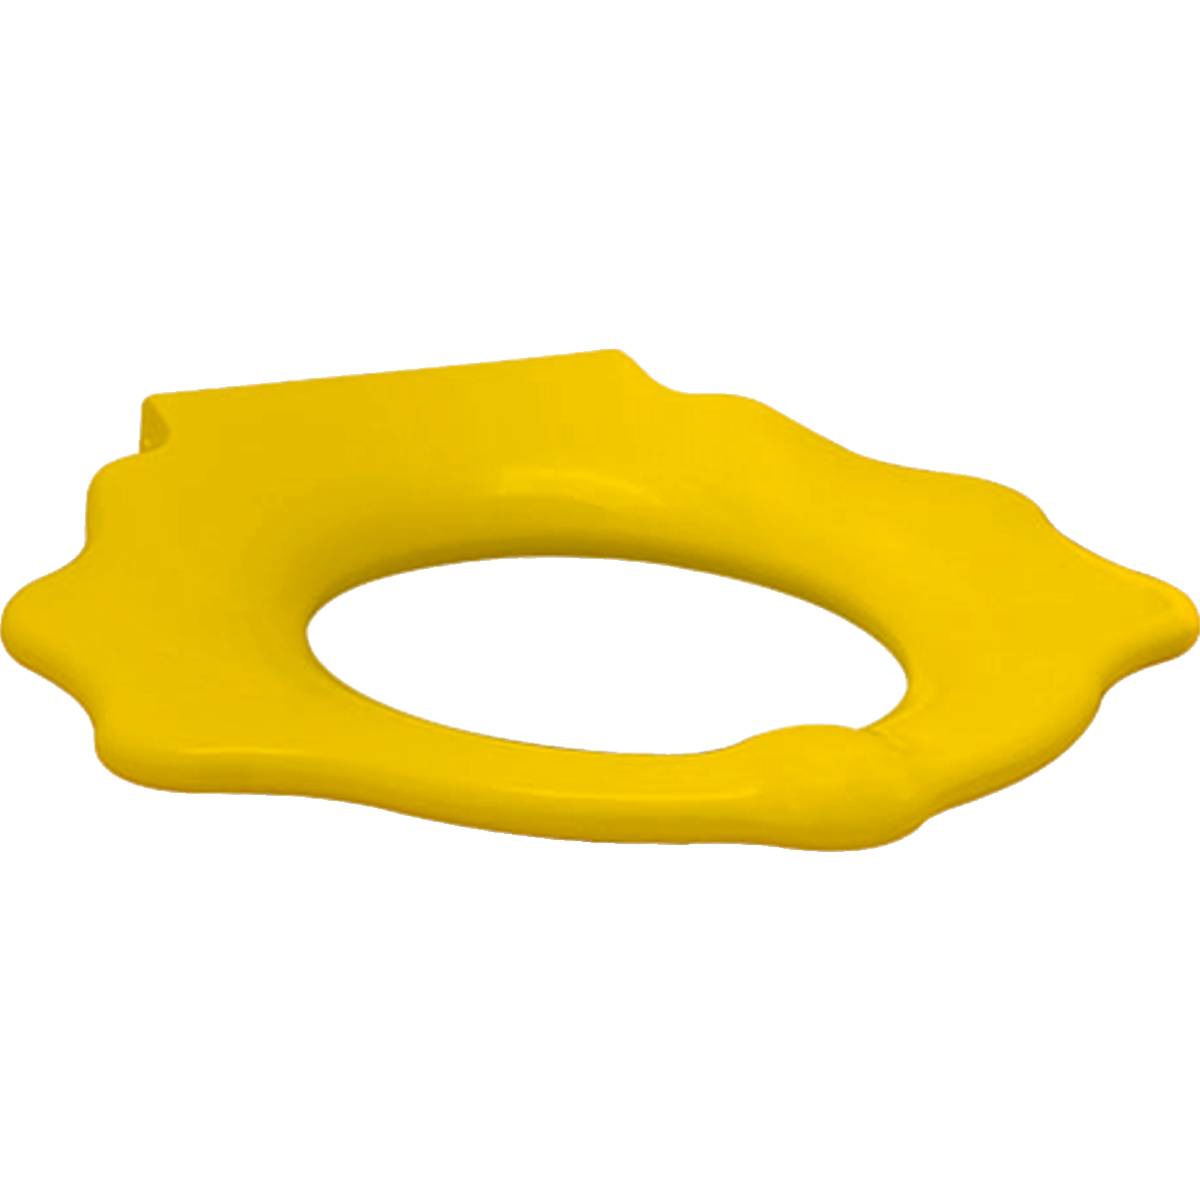 Bambini WC Seat Ring For Children, With Grips, Turtle Design